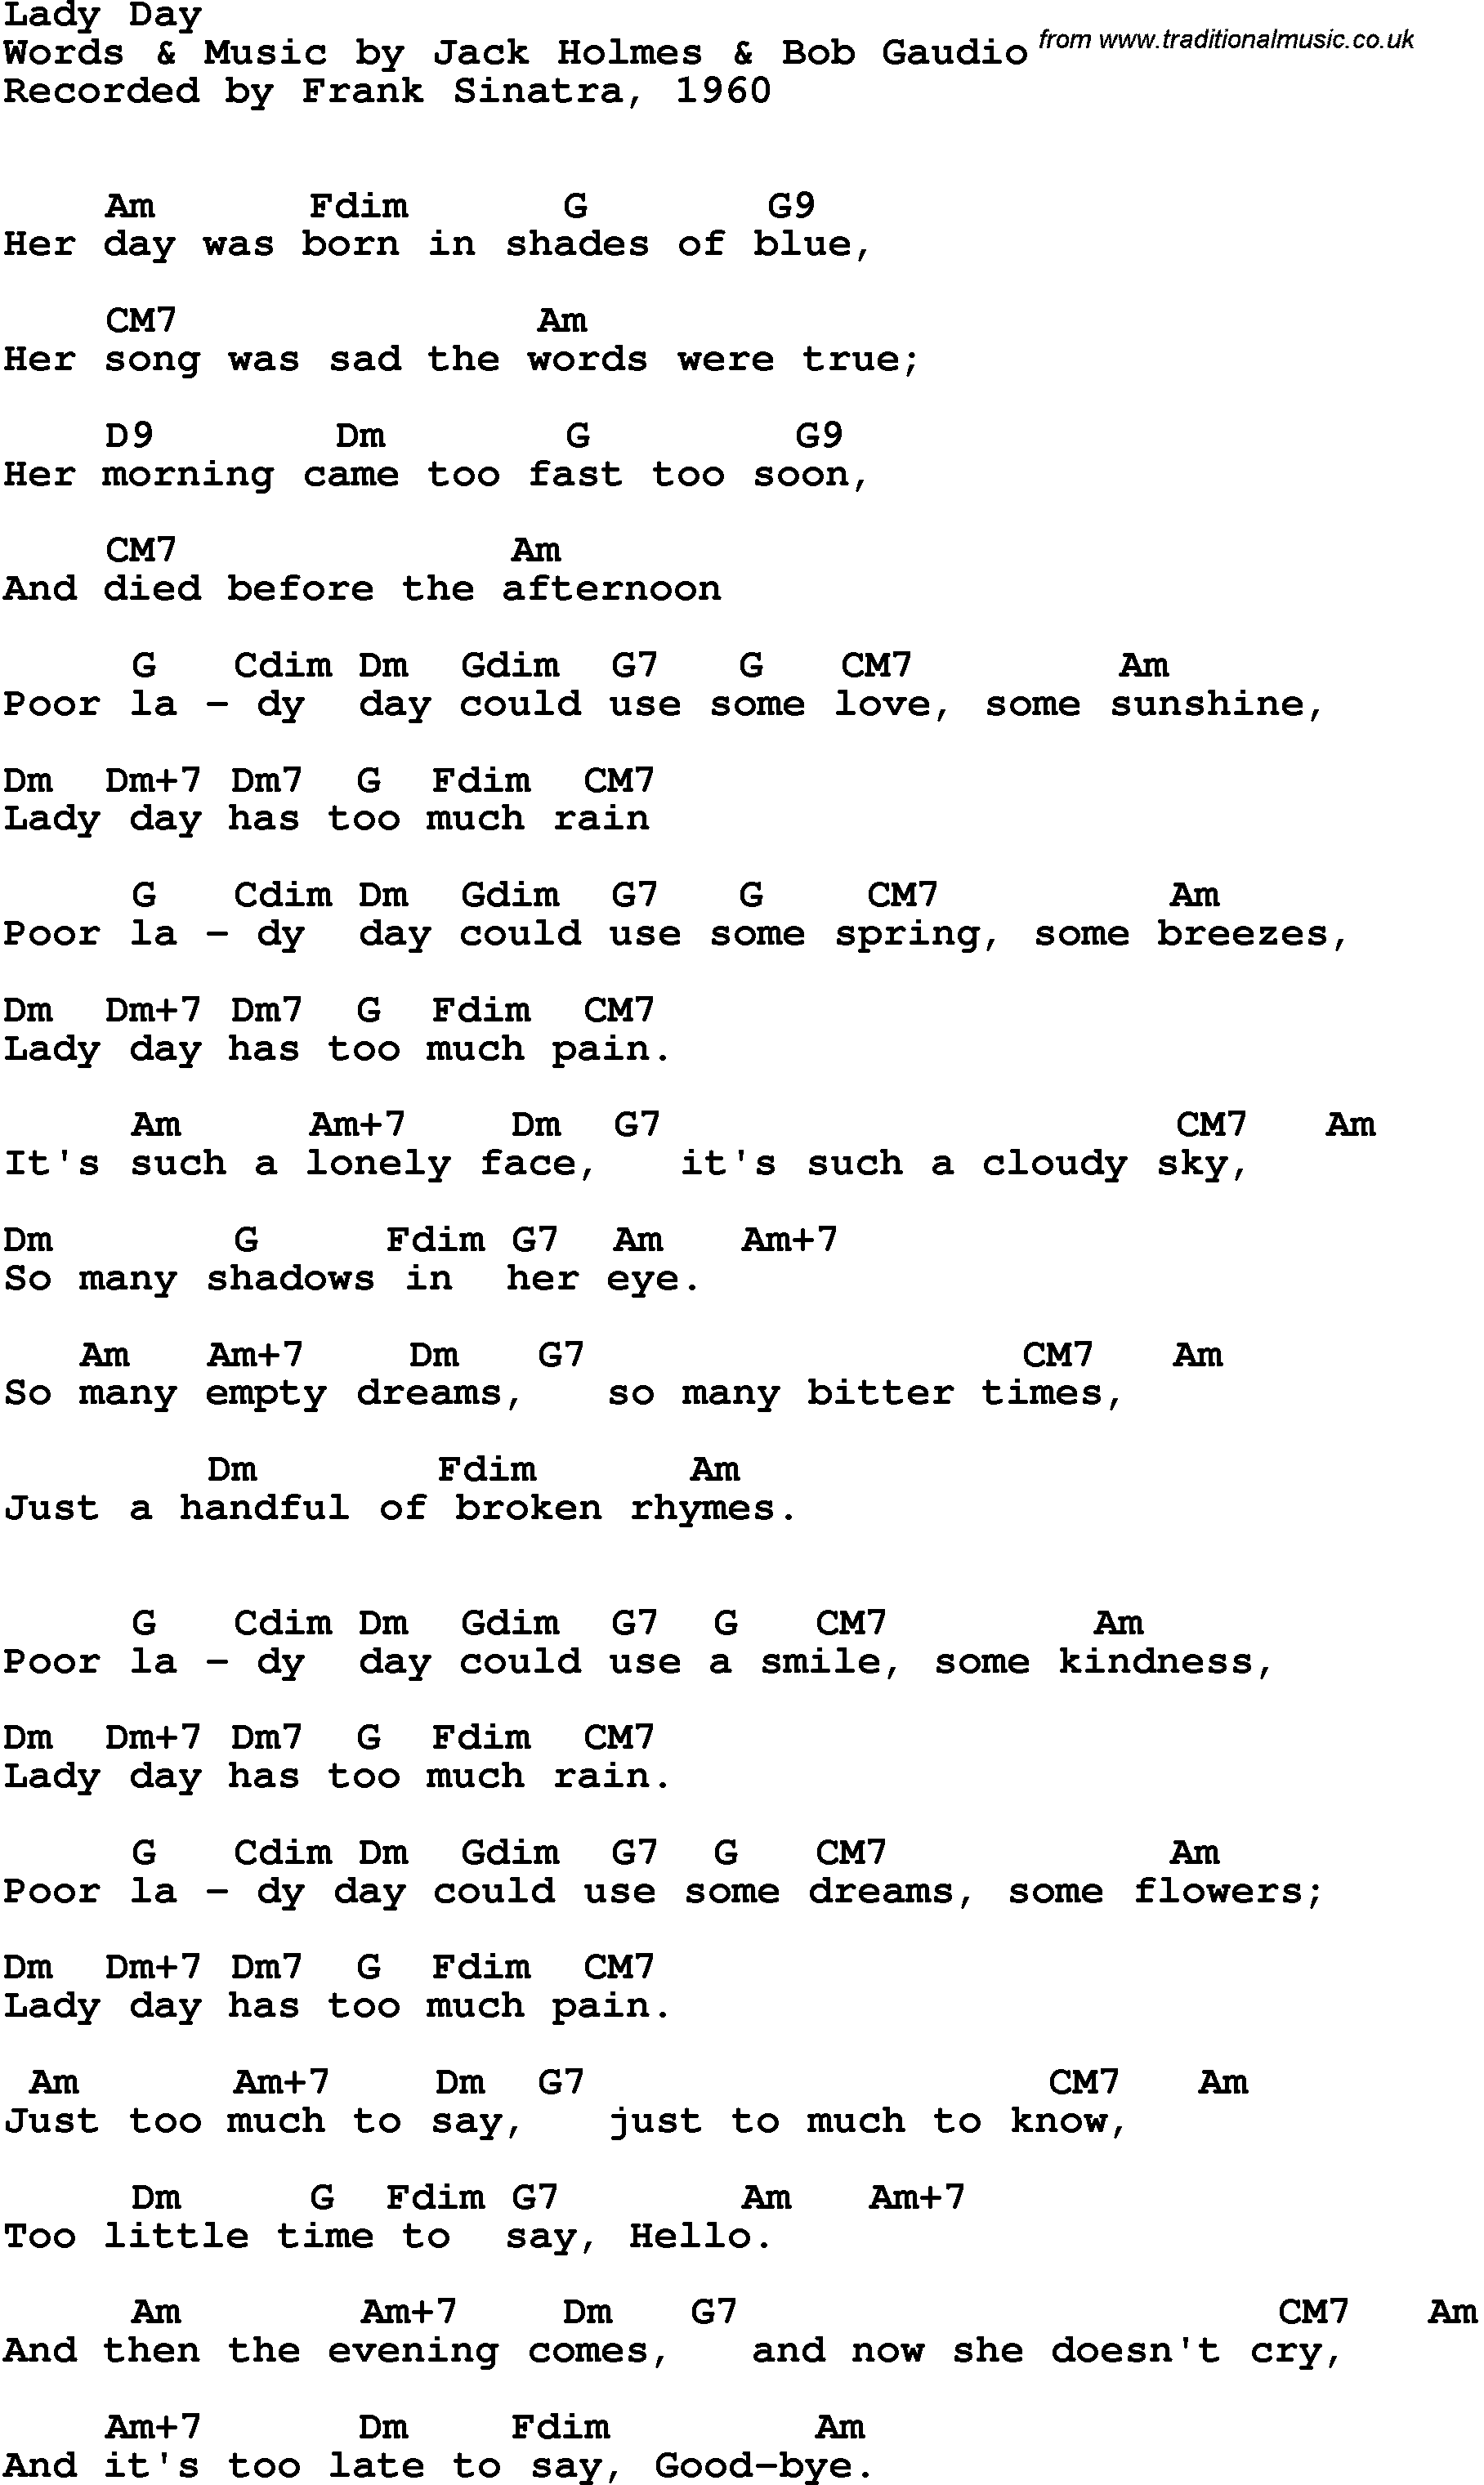 Song Lyrics with guitar chords for Lady Day - Frank Sinatra, 1960